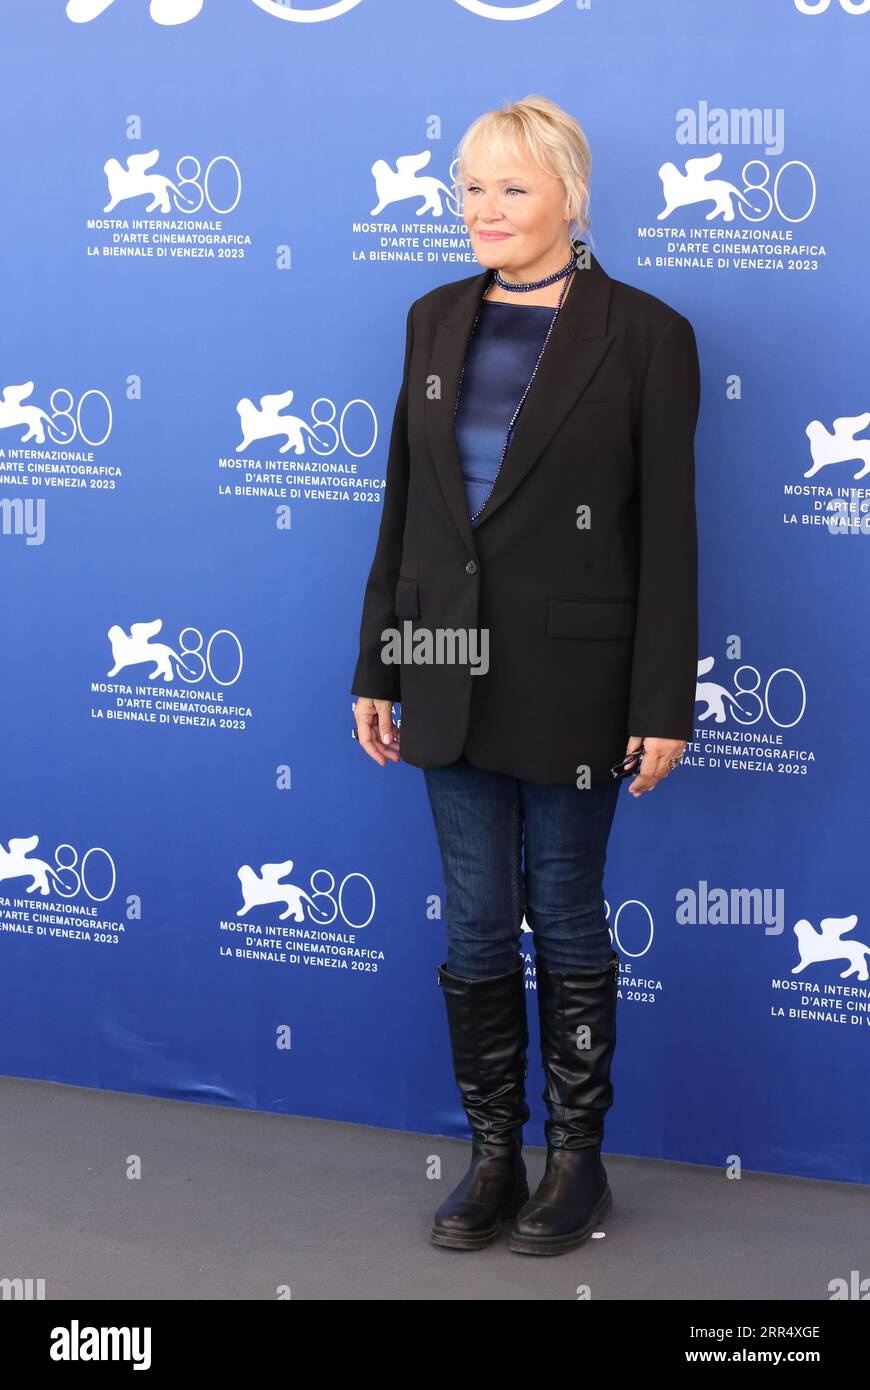 Venice, Italy, 5th September, 2023. Chiara Noschese at the photo call for the film Enea at the 80th Venice International Film Festival. Photo Credit: Doreen Kennedy / Alamy Live News. Stock Photo